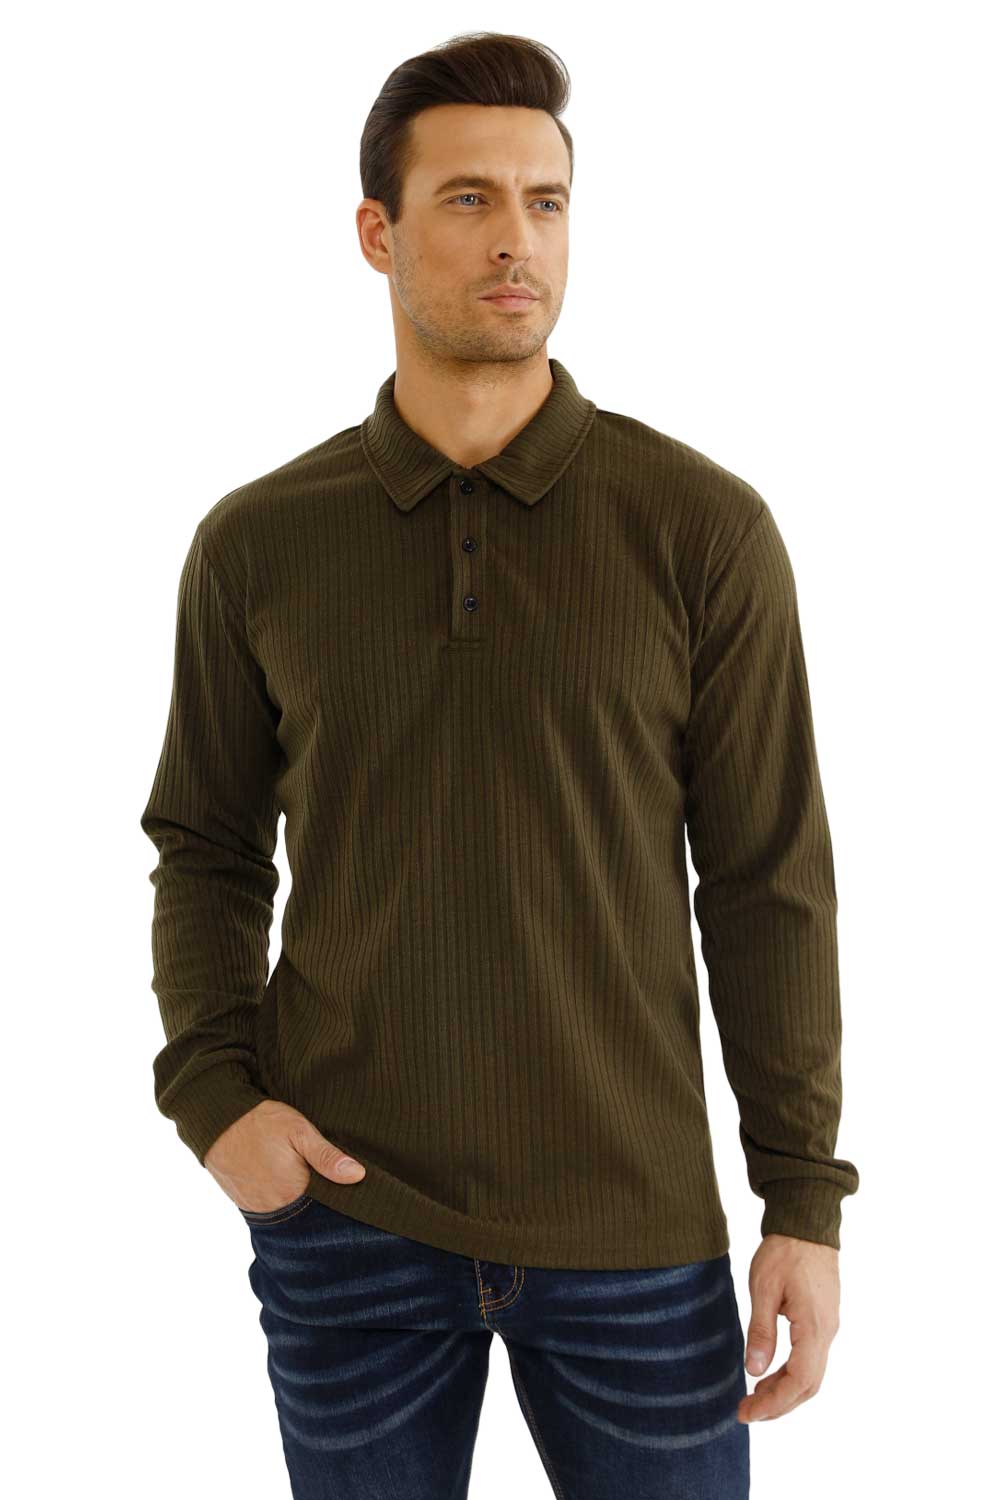 Gingtto Classic Fashion Polo Shirts for Men: Effortless Sophistication